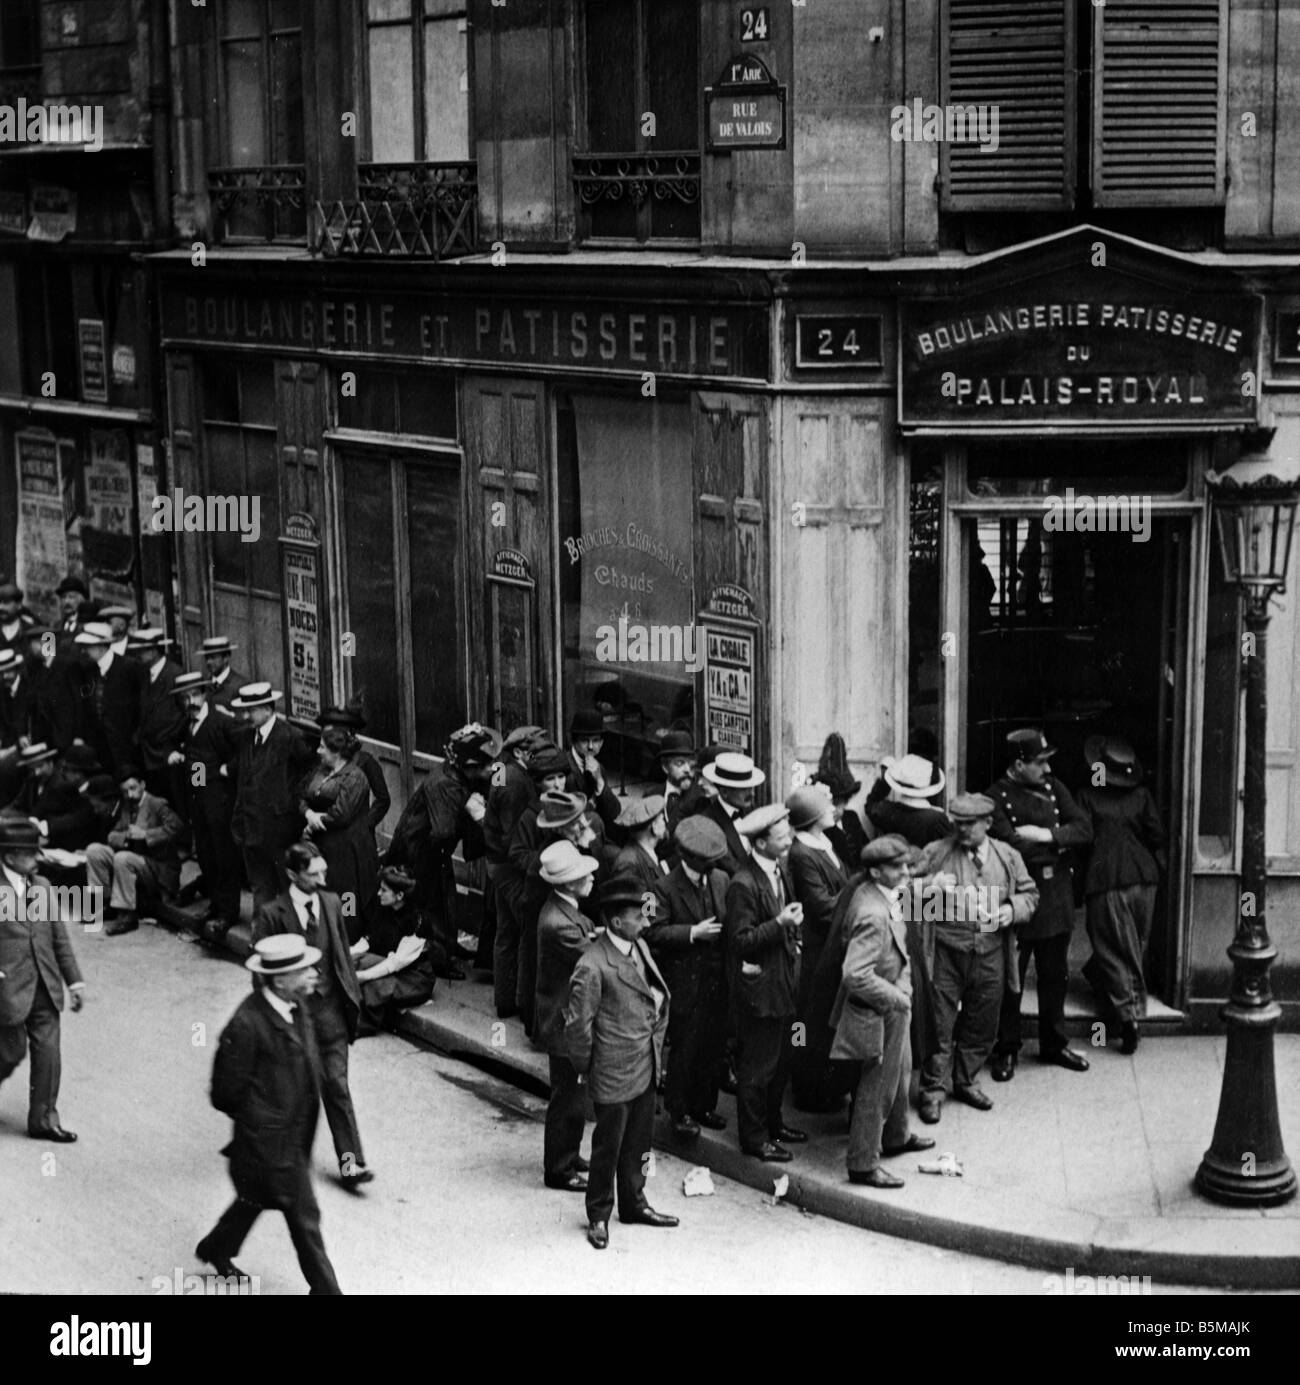 WW I Paris Queue in front of bakery History World War I War economy France Queue in front of a bakery in Paris Photo undated Stock Photo